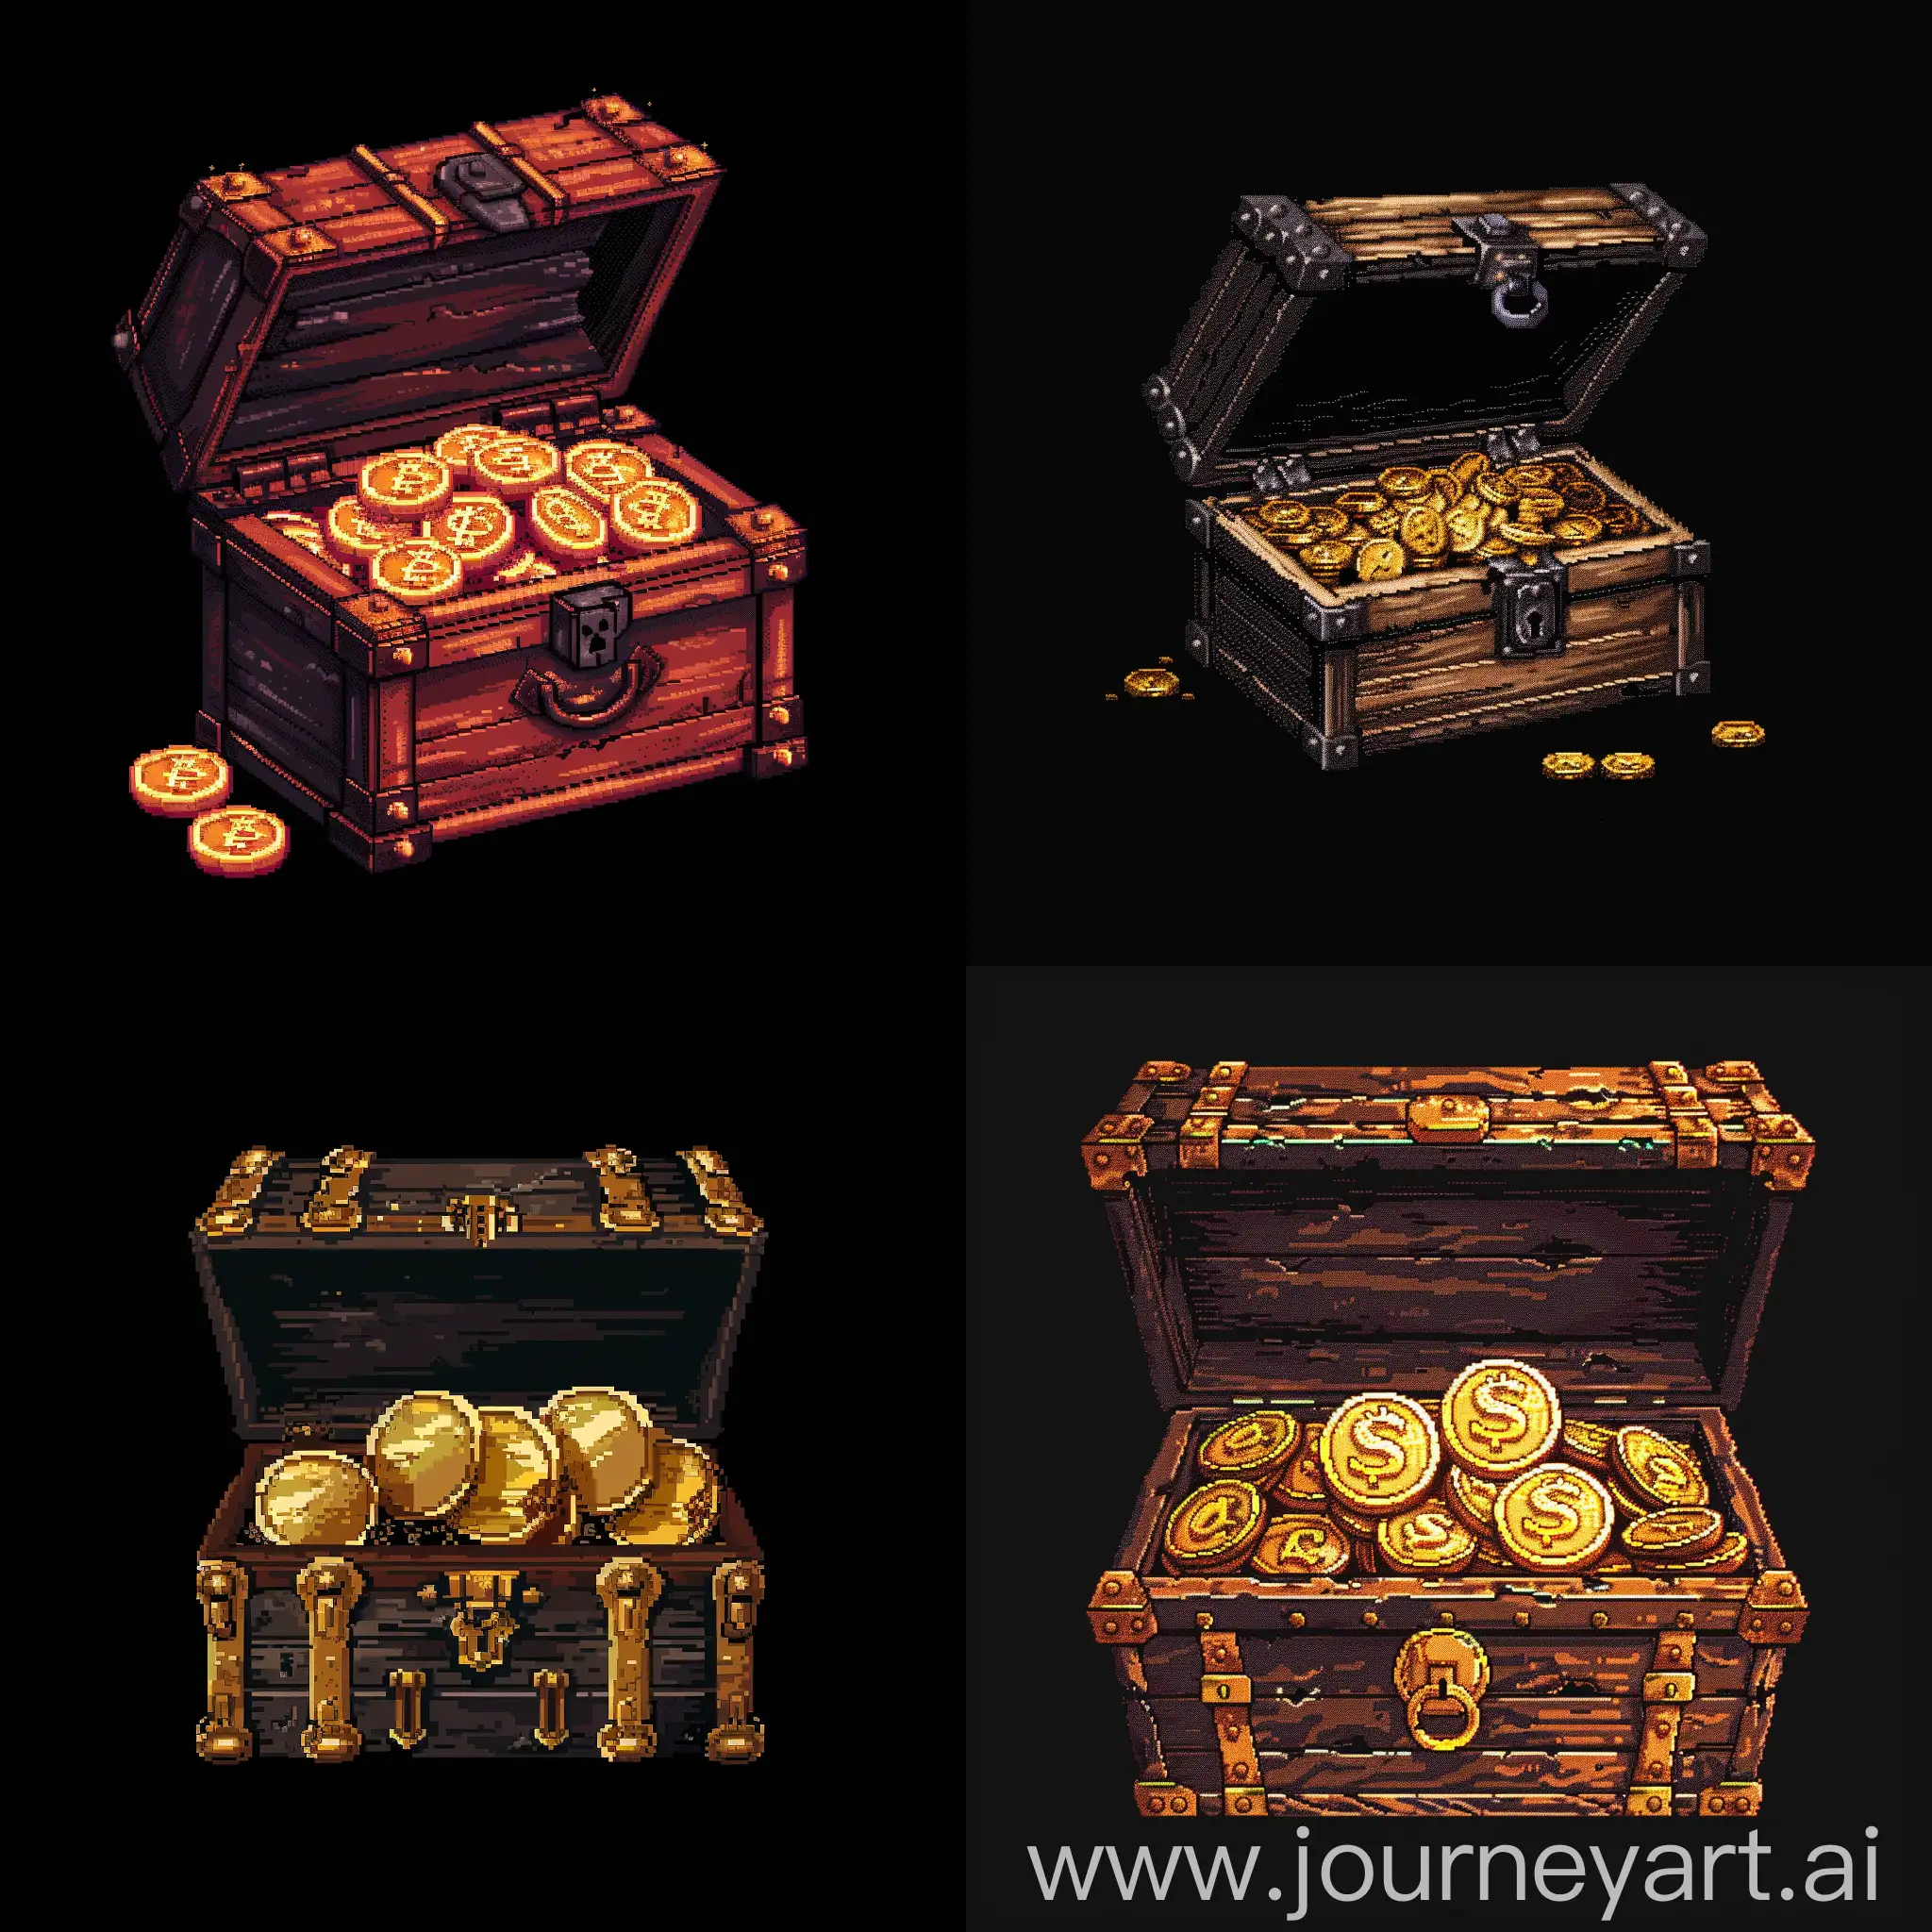 Open-Chest-with-Five-Gold-Coins-in-Pixel-Art-Horror-Style